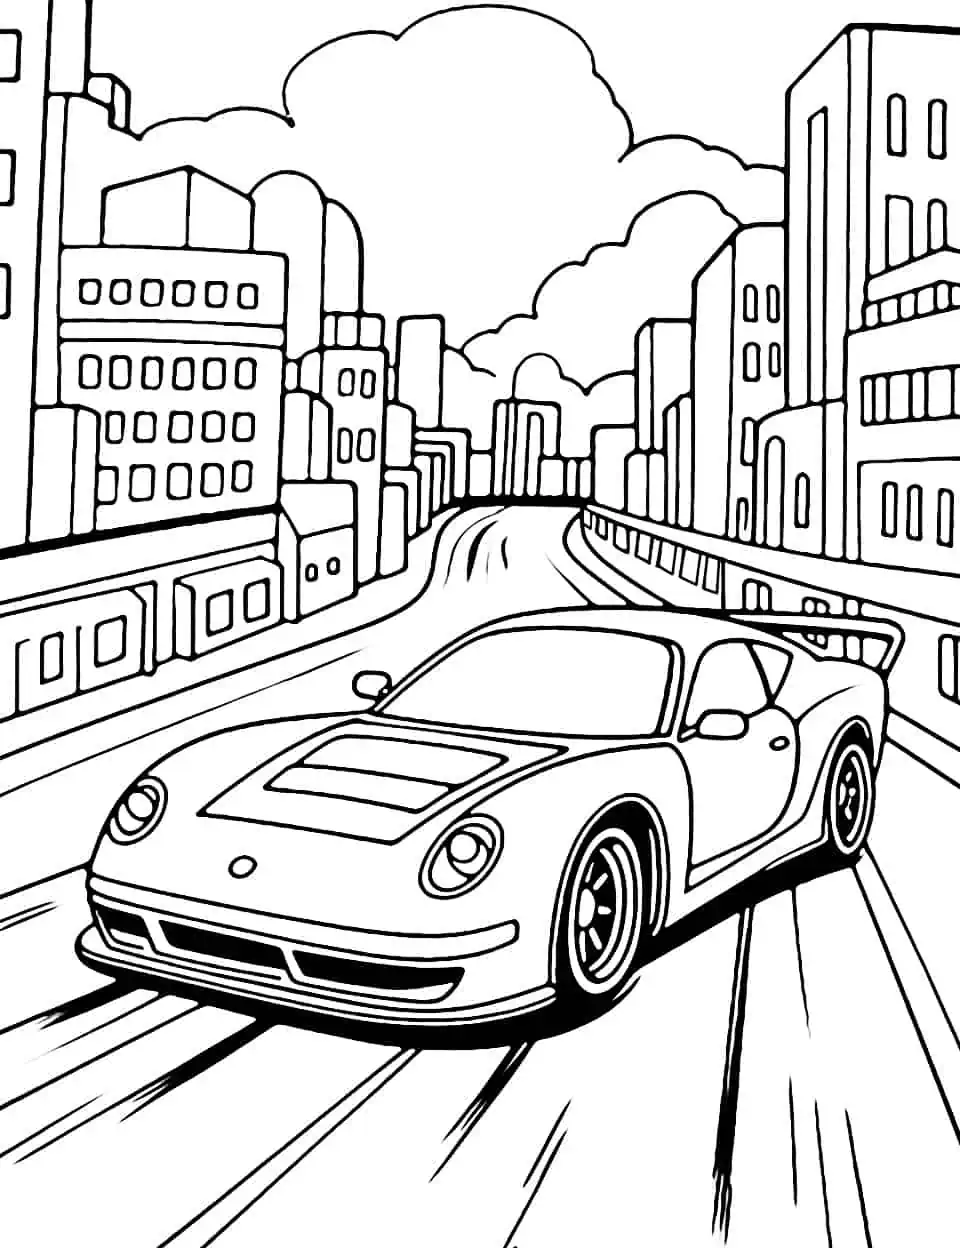 Racing Through the City Car Coloring Page - A fast car racing through the city streets at night.